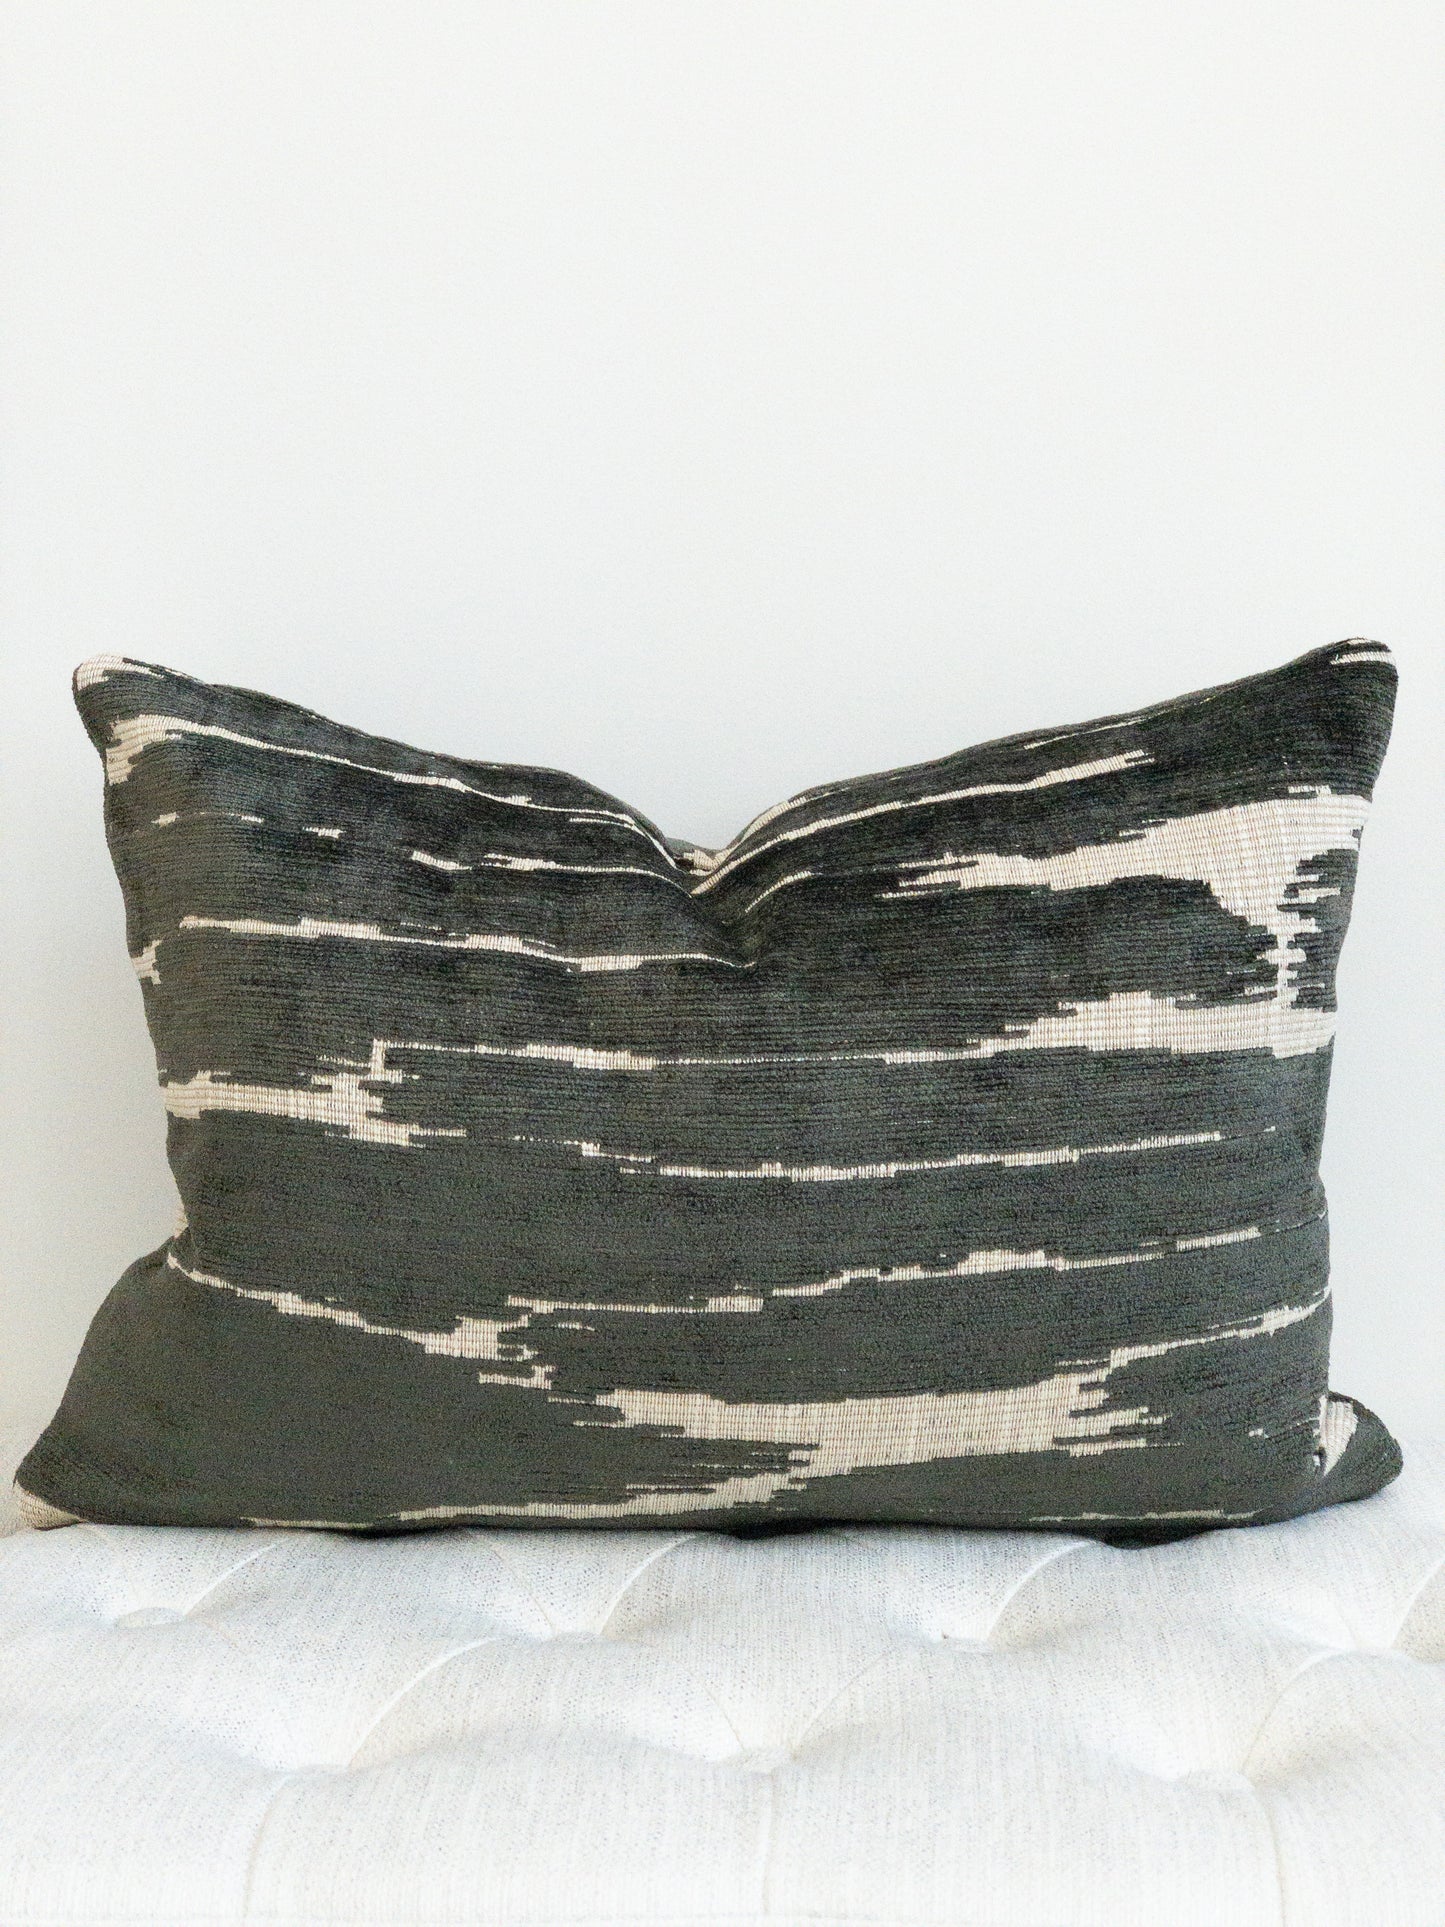 Black and beige chenille lumbar pillow. Black raised threads on flat beige background. Abstract placement of alternating colors.